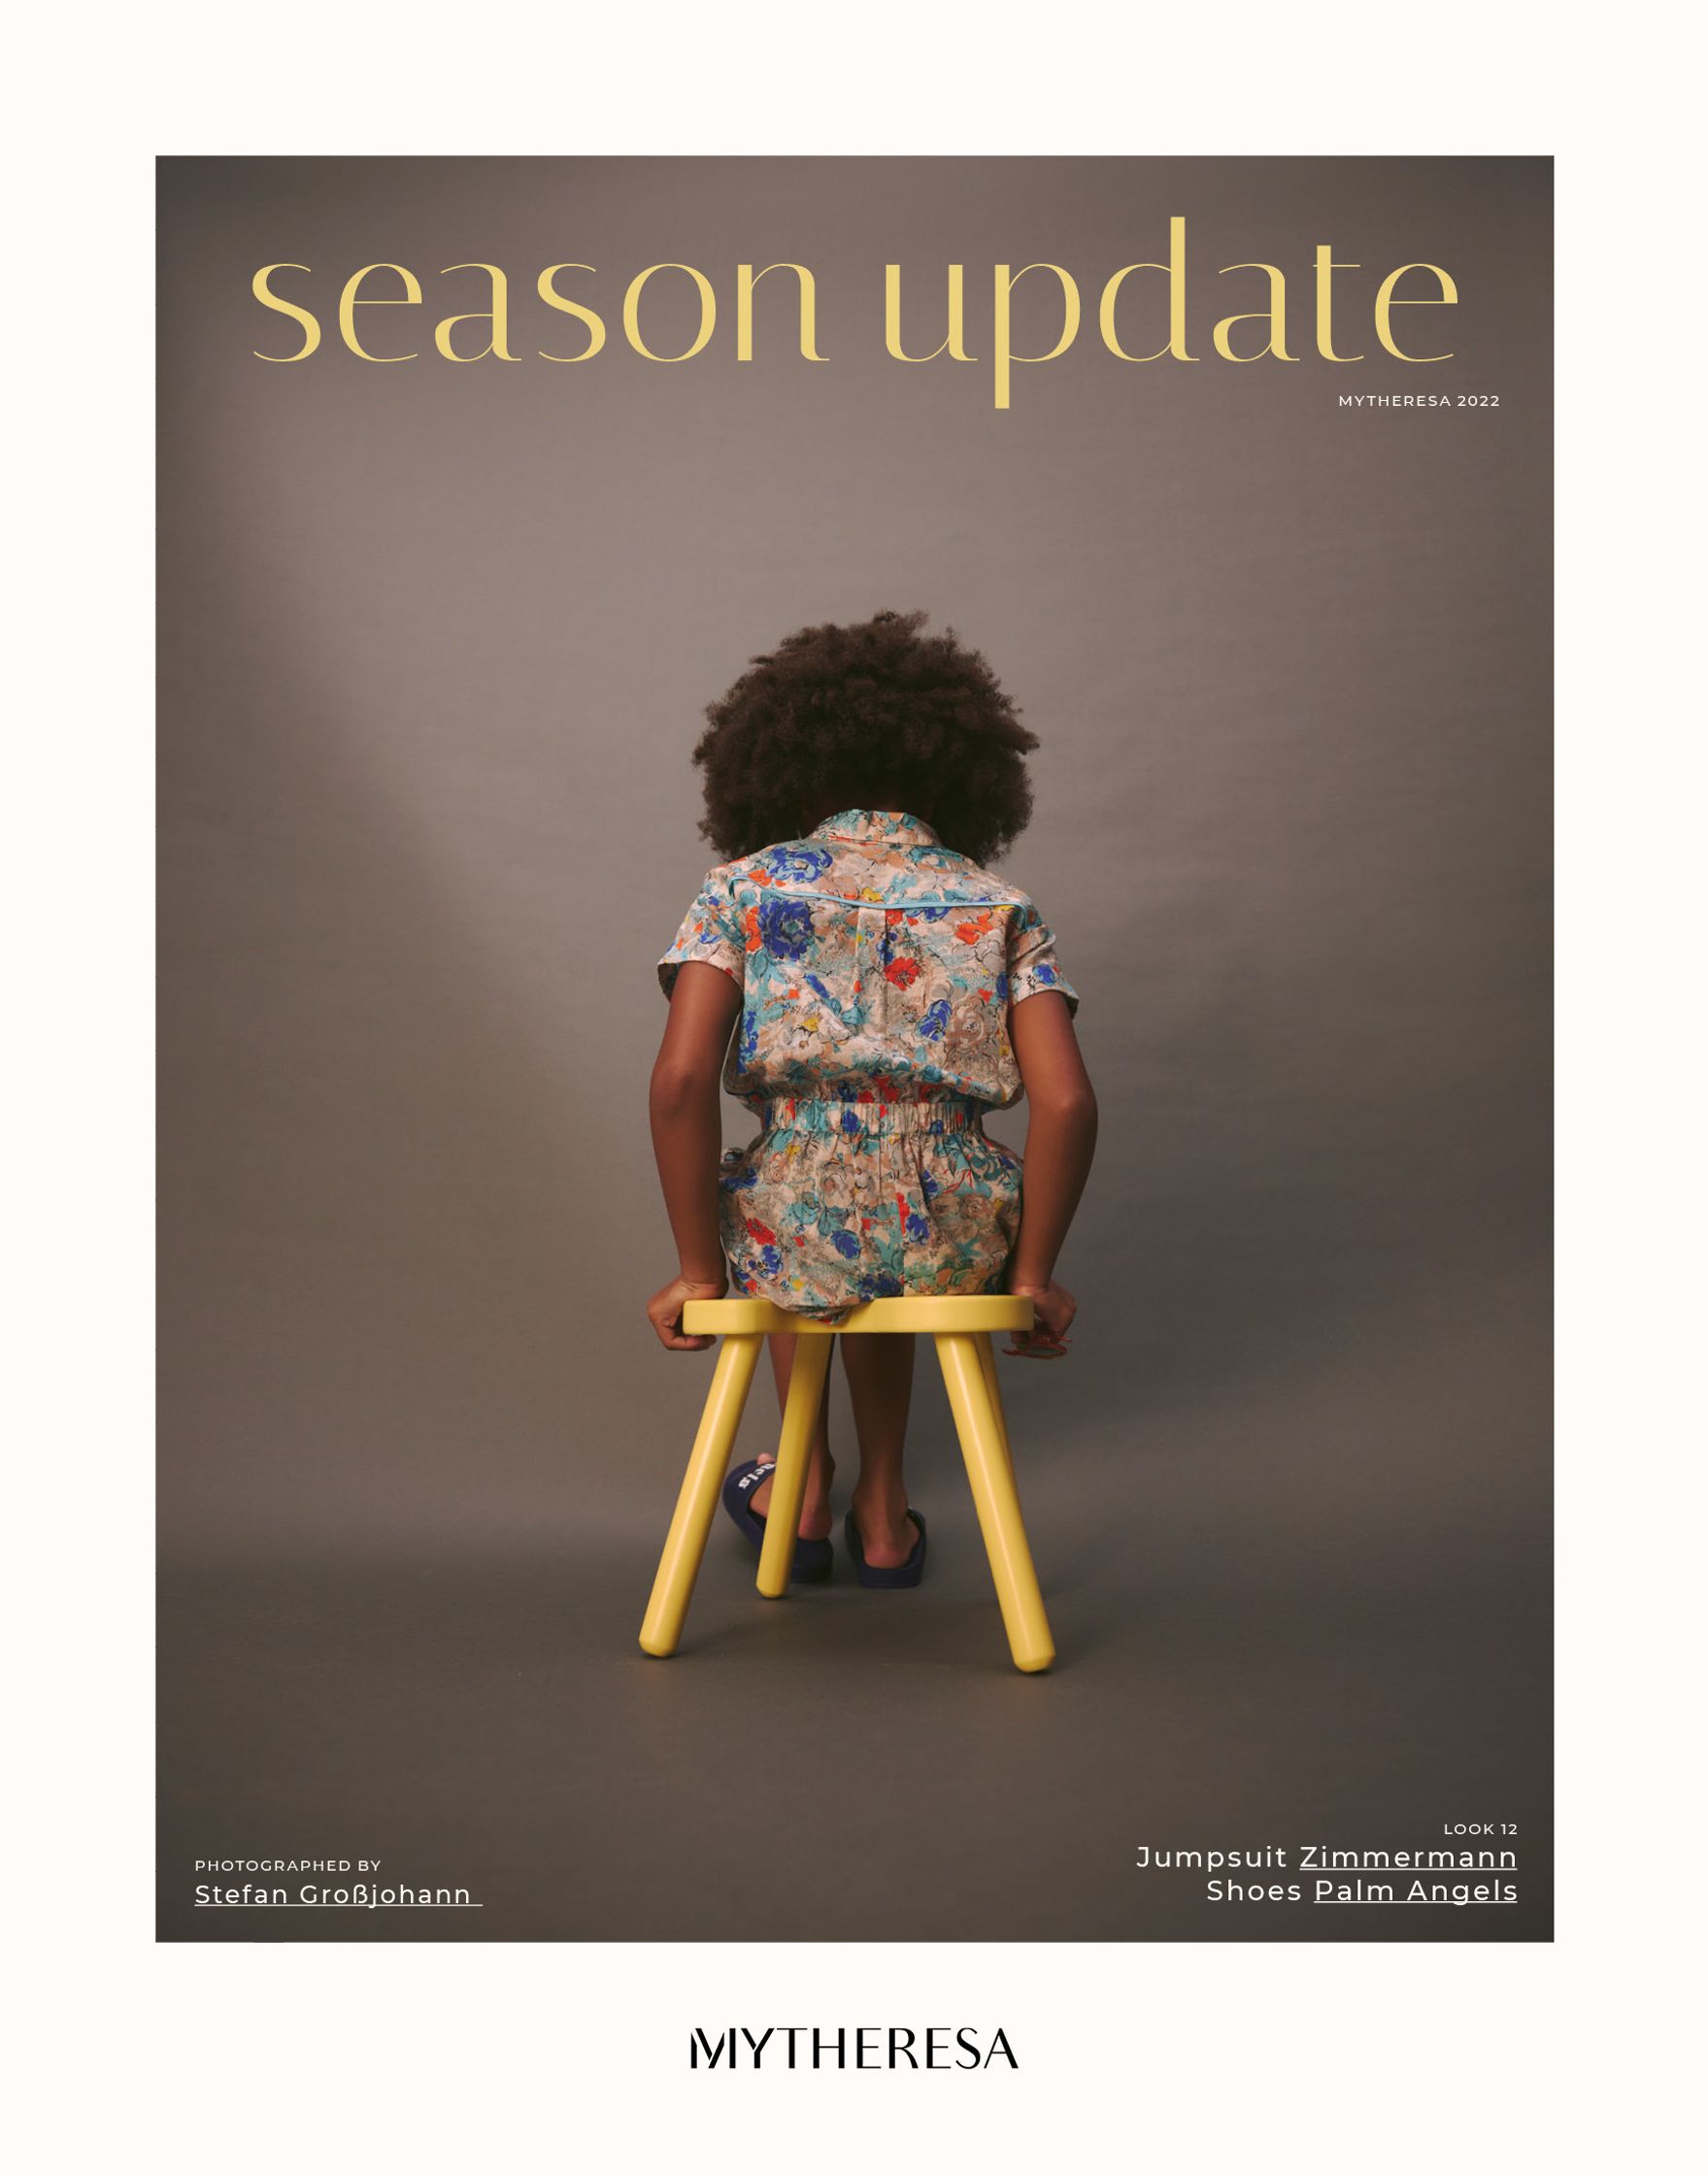 a young girl sitting on a chair on the cover of season update